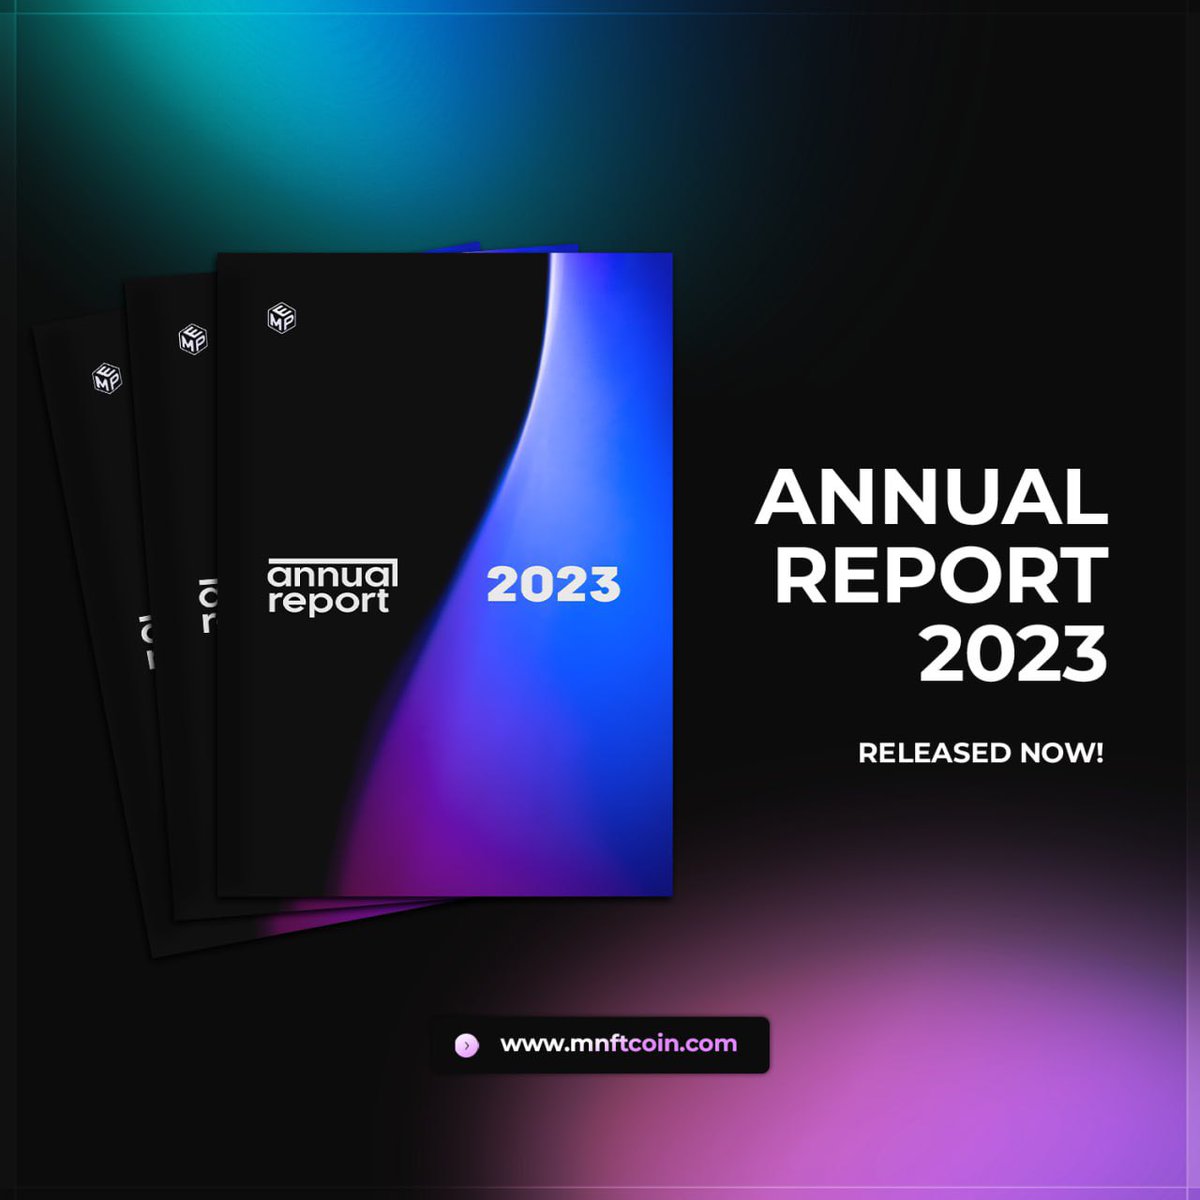 ⚫️ Annual Report 2023

⚫️ Visit the link mnftcoin.com and click on 'Annual report' to view detailed information about the 2023 'Annual Report'!

#MongolNFT #MNFT #AnnualReport